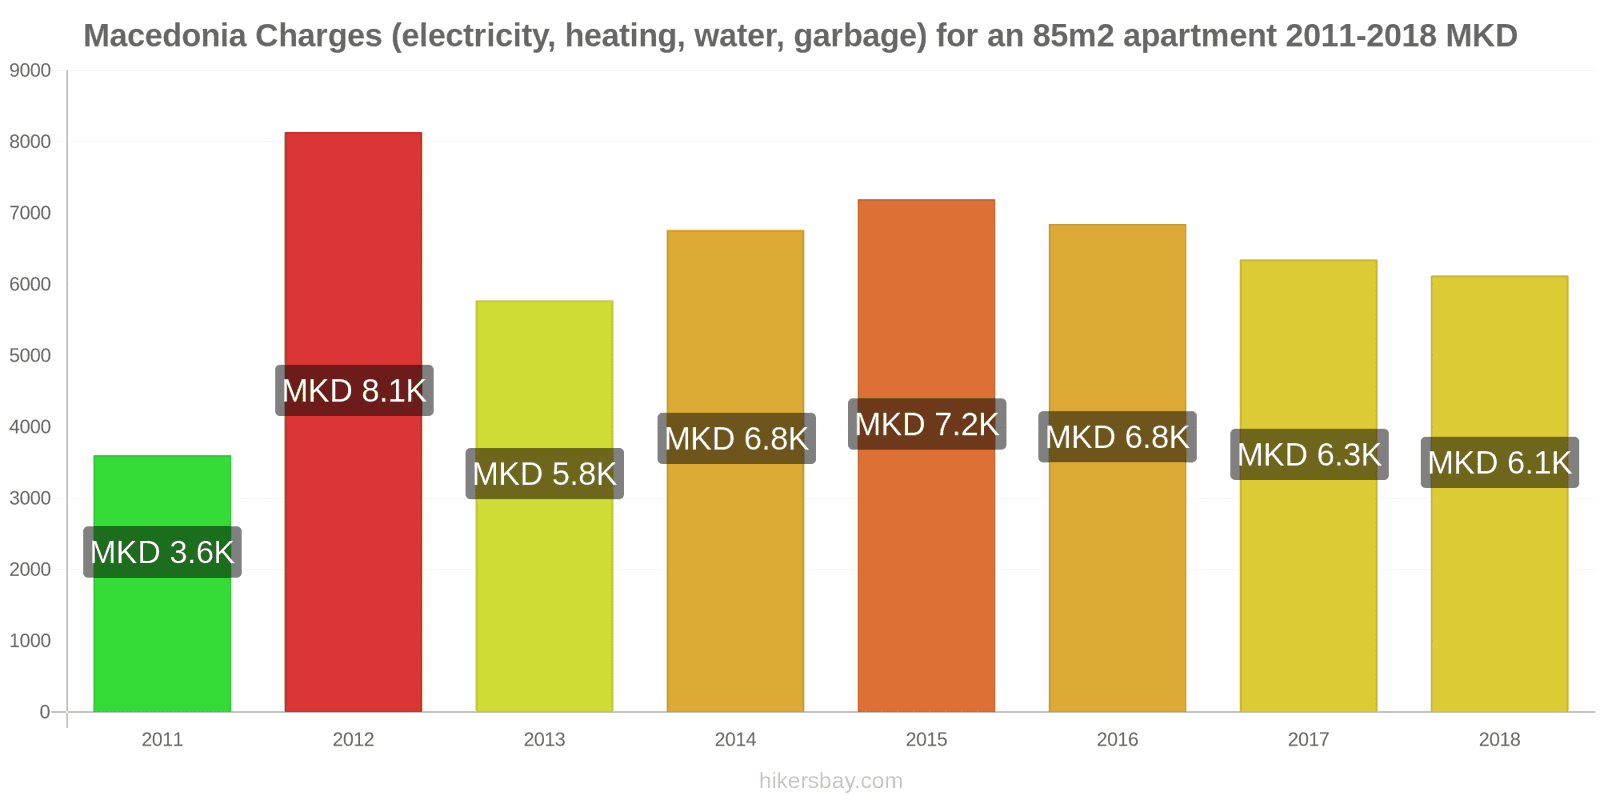 Macedonia price changes Utilities (electricity, heating, water, garbage) for an 85m2 apartment hikersbay.com